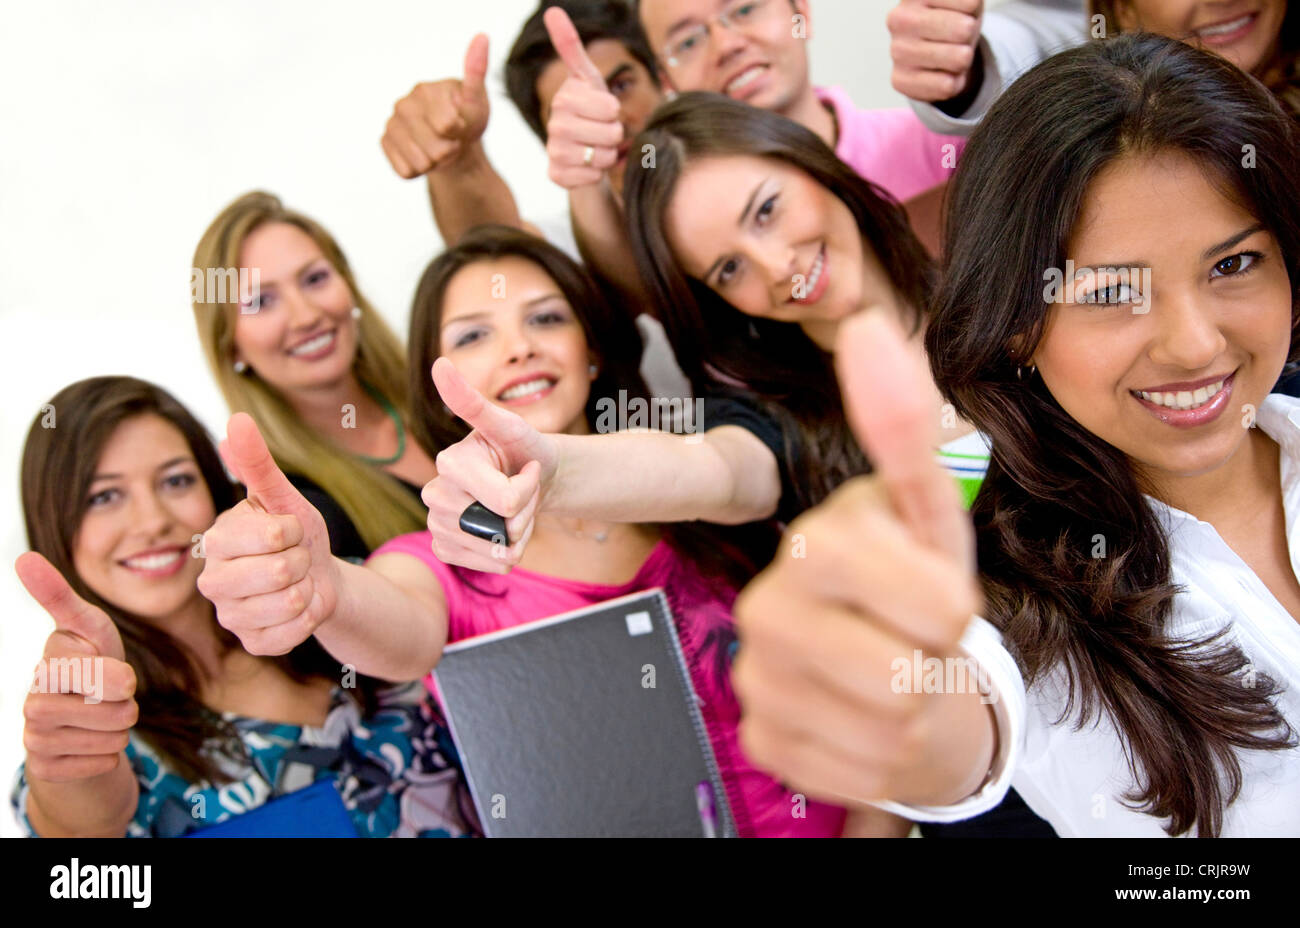 group of students smiling and doing a thumbs up sign Stock Photo